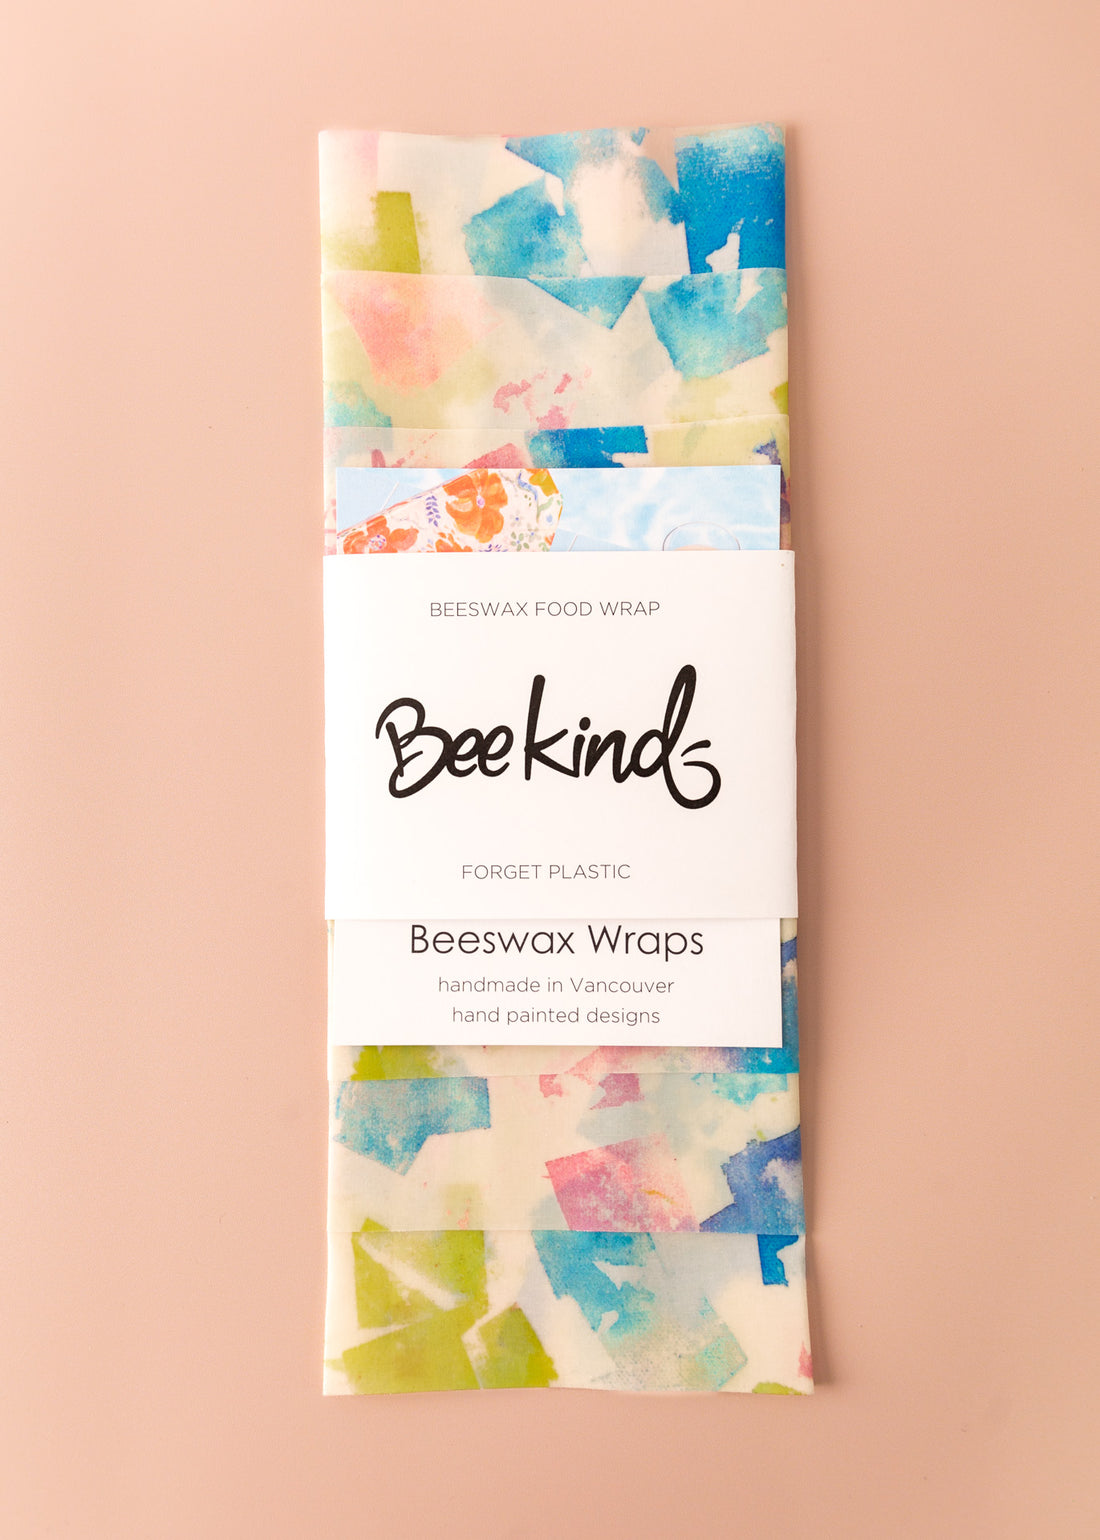 Set of 3 beeswax wraps that are off-white colored with watercolored-like square patterns in variety of colors like blue, light green and pink, folded with a white label saying "beekind" on a pink flatlay